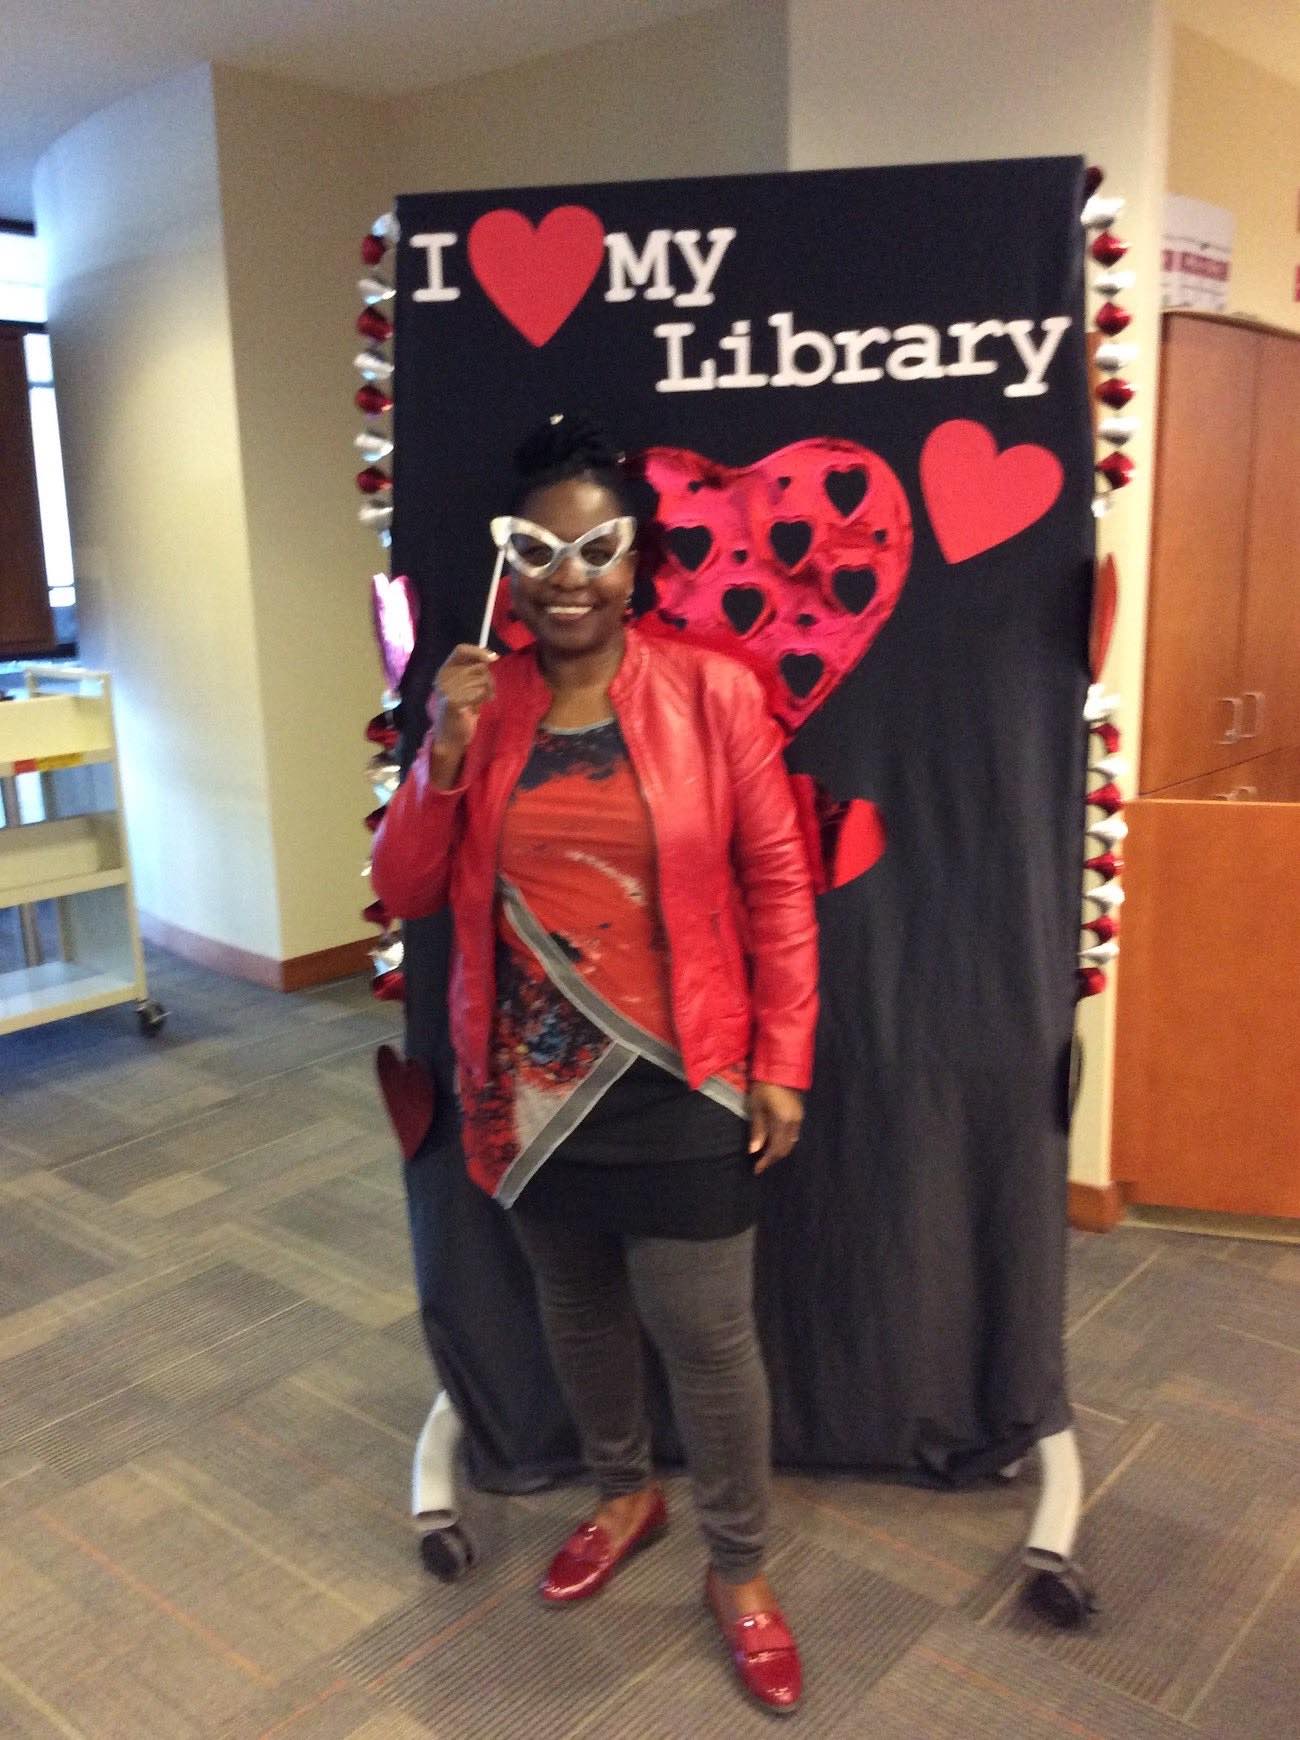 Librarian Mary Chipanshi stands in front of the I love my Library backdrop holding a cut-out of funky glasses up in front of her eyes as though she's wearing them and smiling broadly